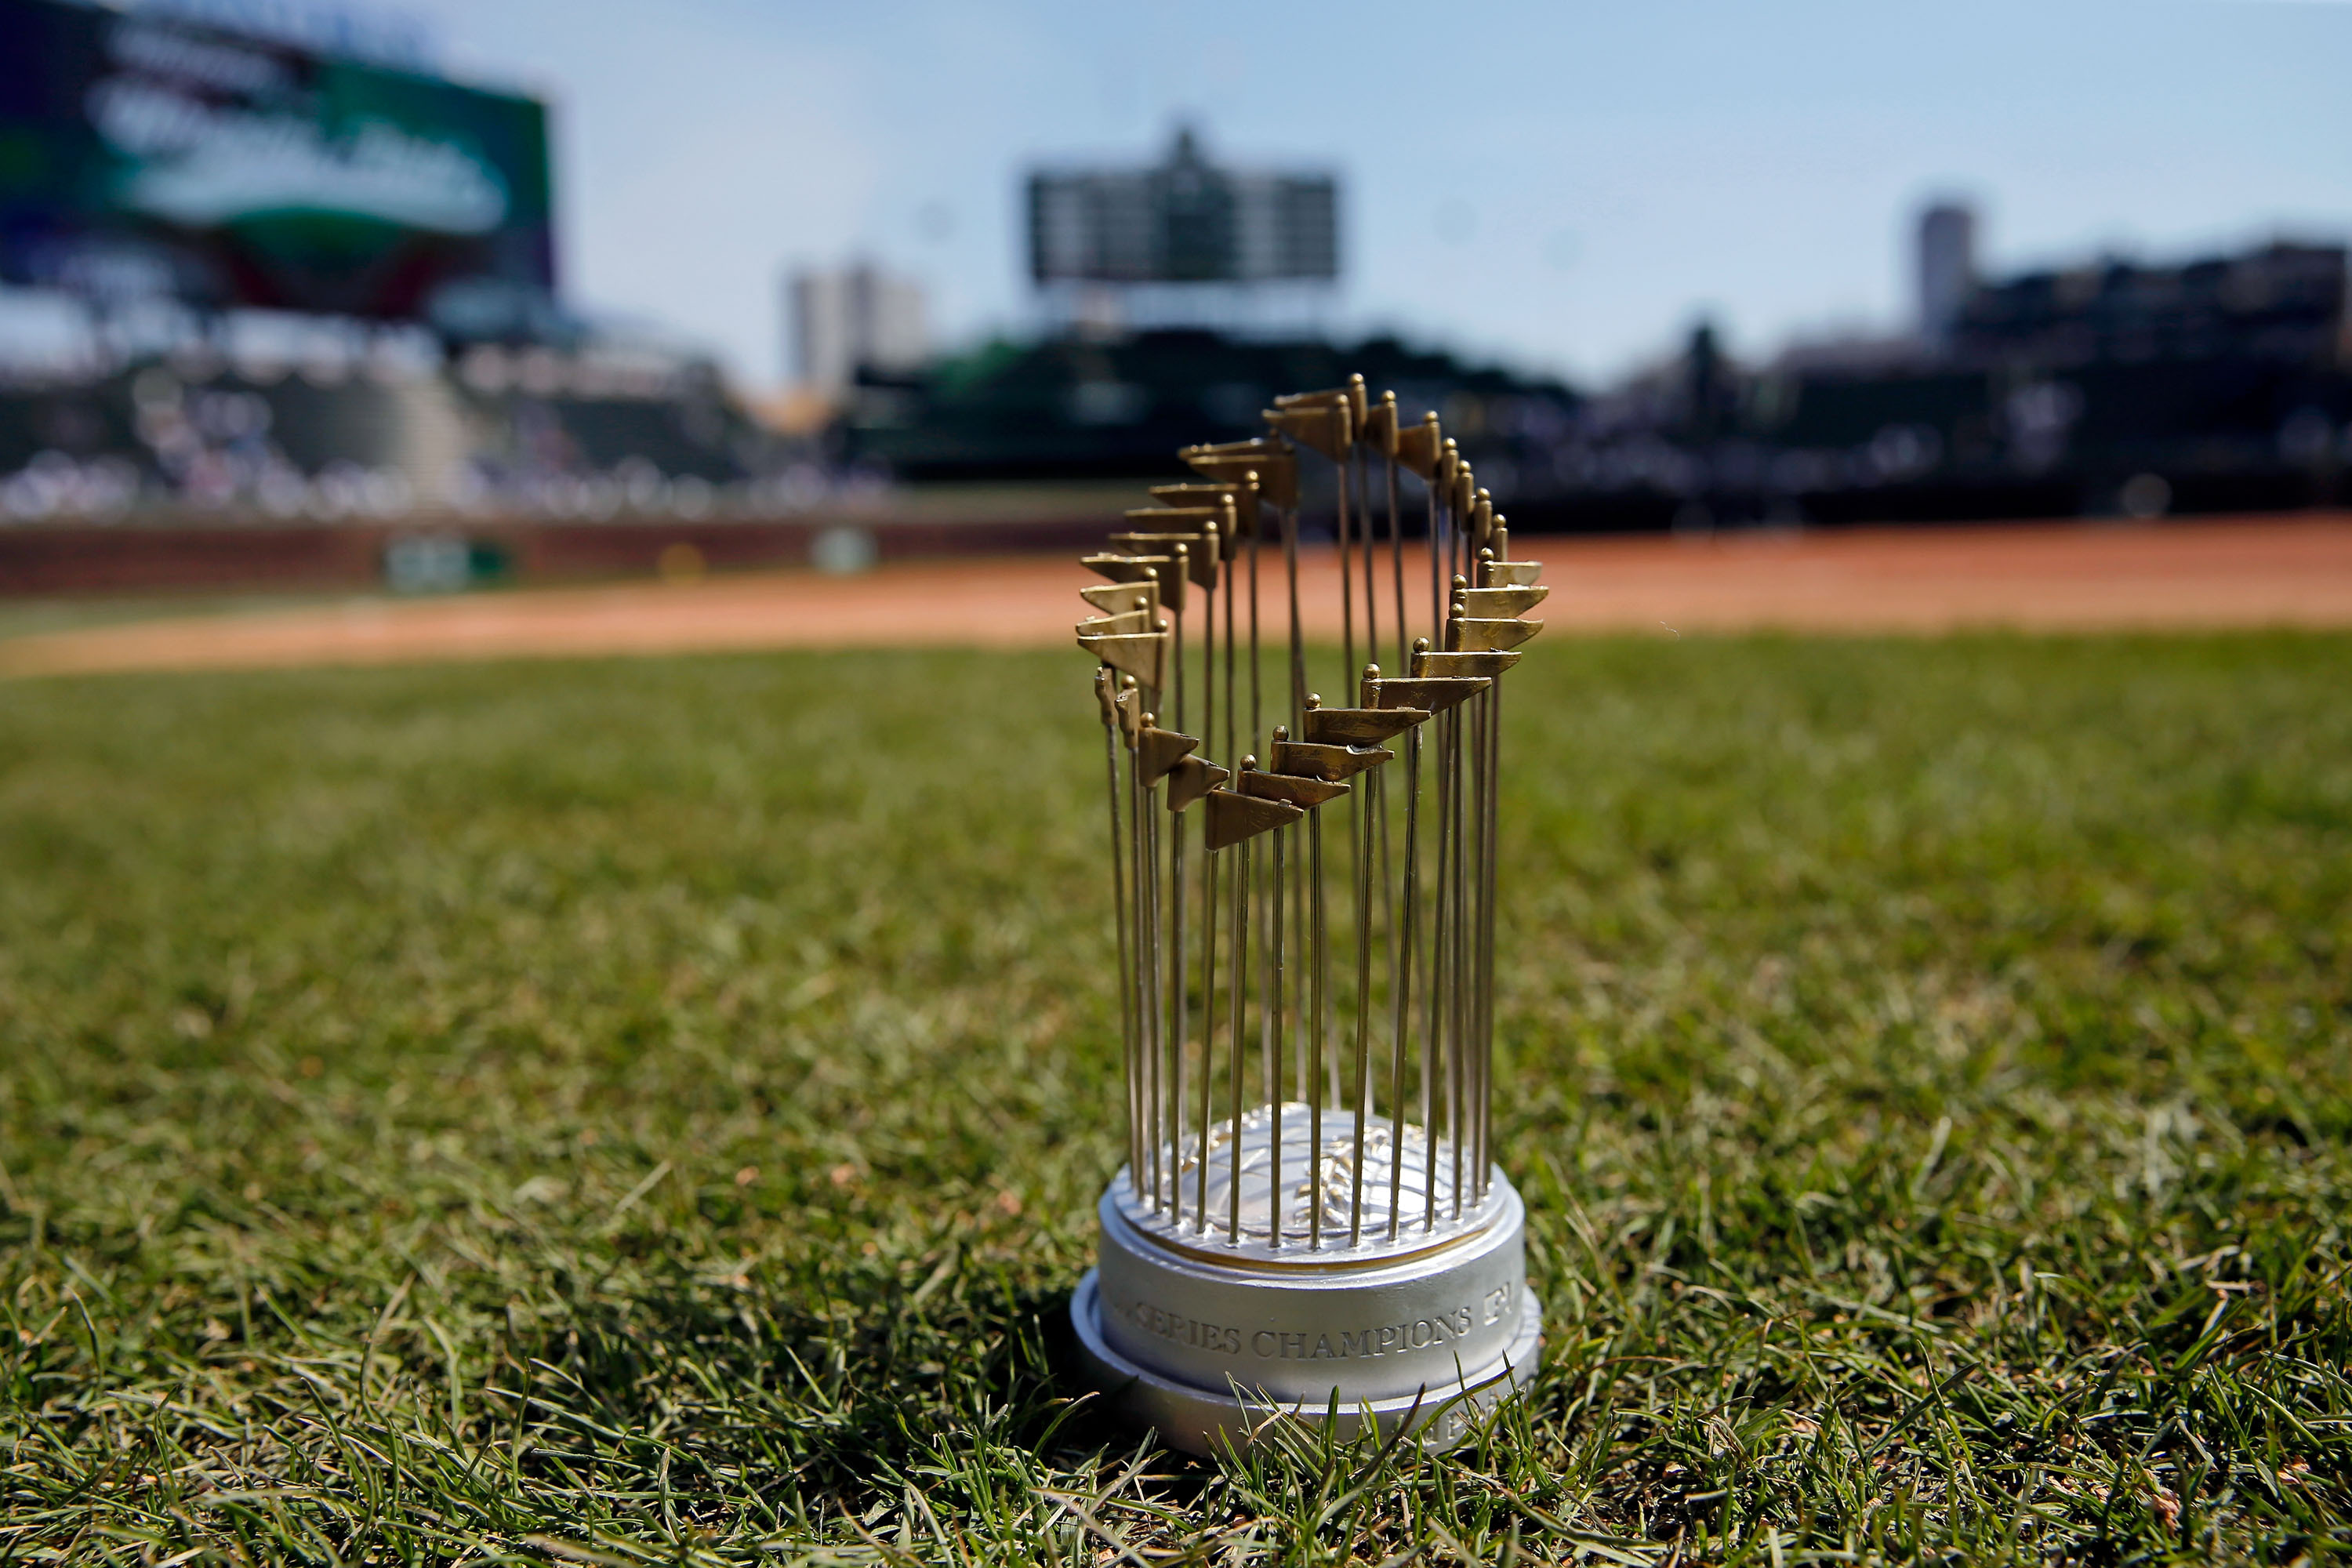 Cubs' World Series Trophy Reportedly Damaged During Charity